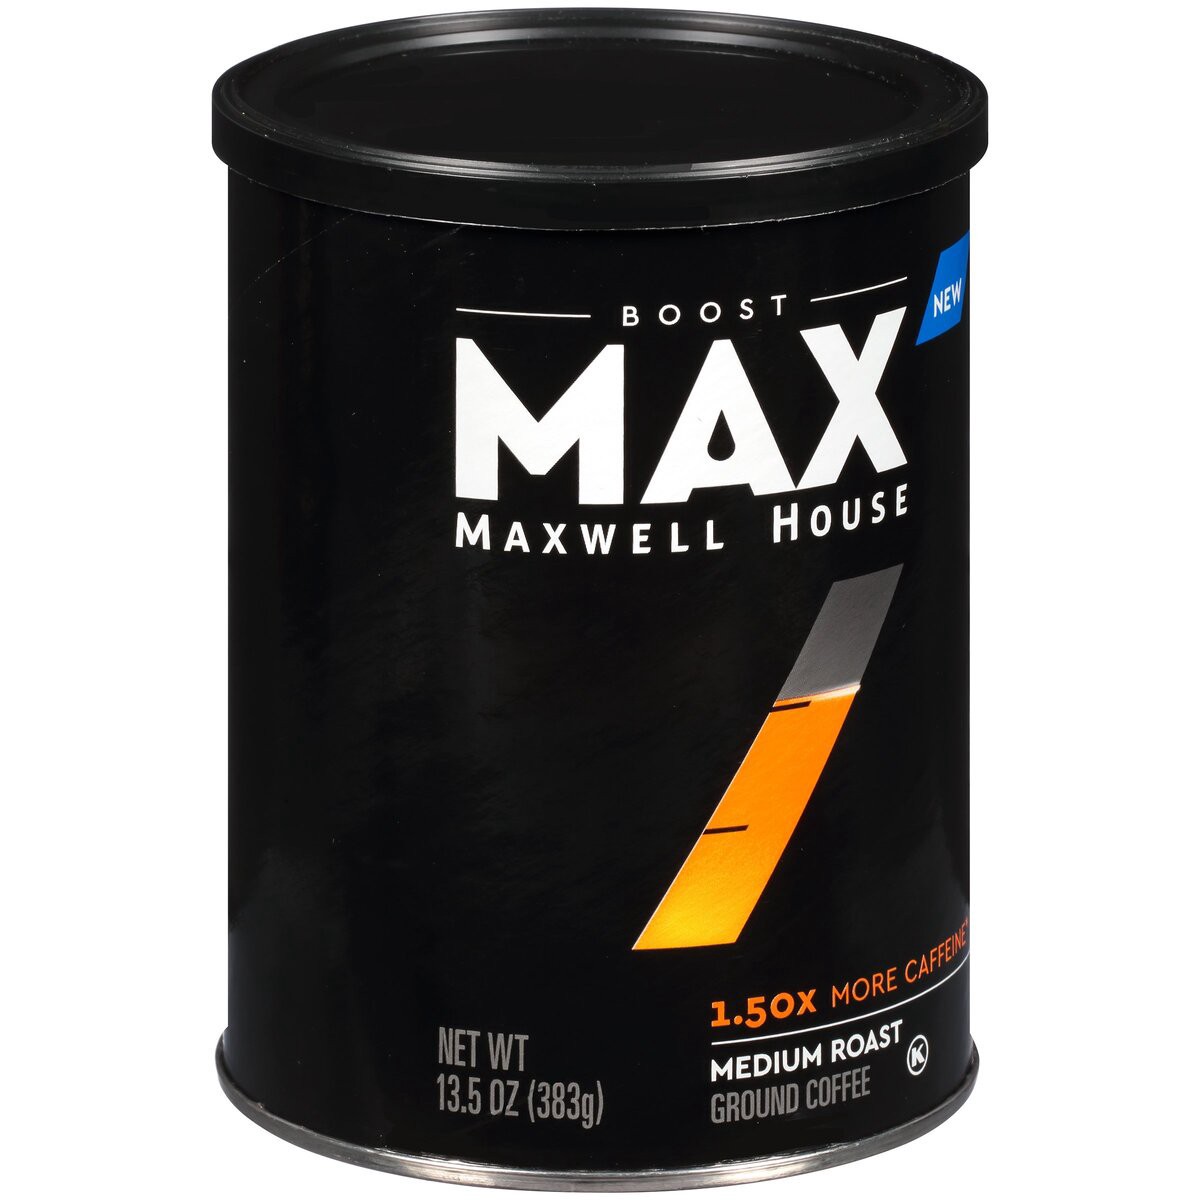 slide 7 of 7, Boost Max Maxwell House Max Boost Medium Roast Ground Coffee with 1.50X More Caffeine, 13.5 oz Canister, 13.5 oz